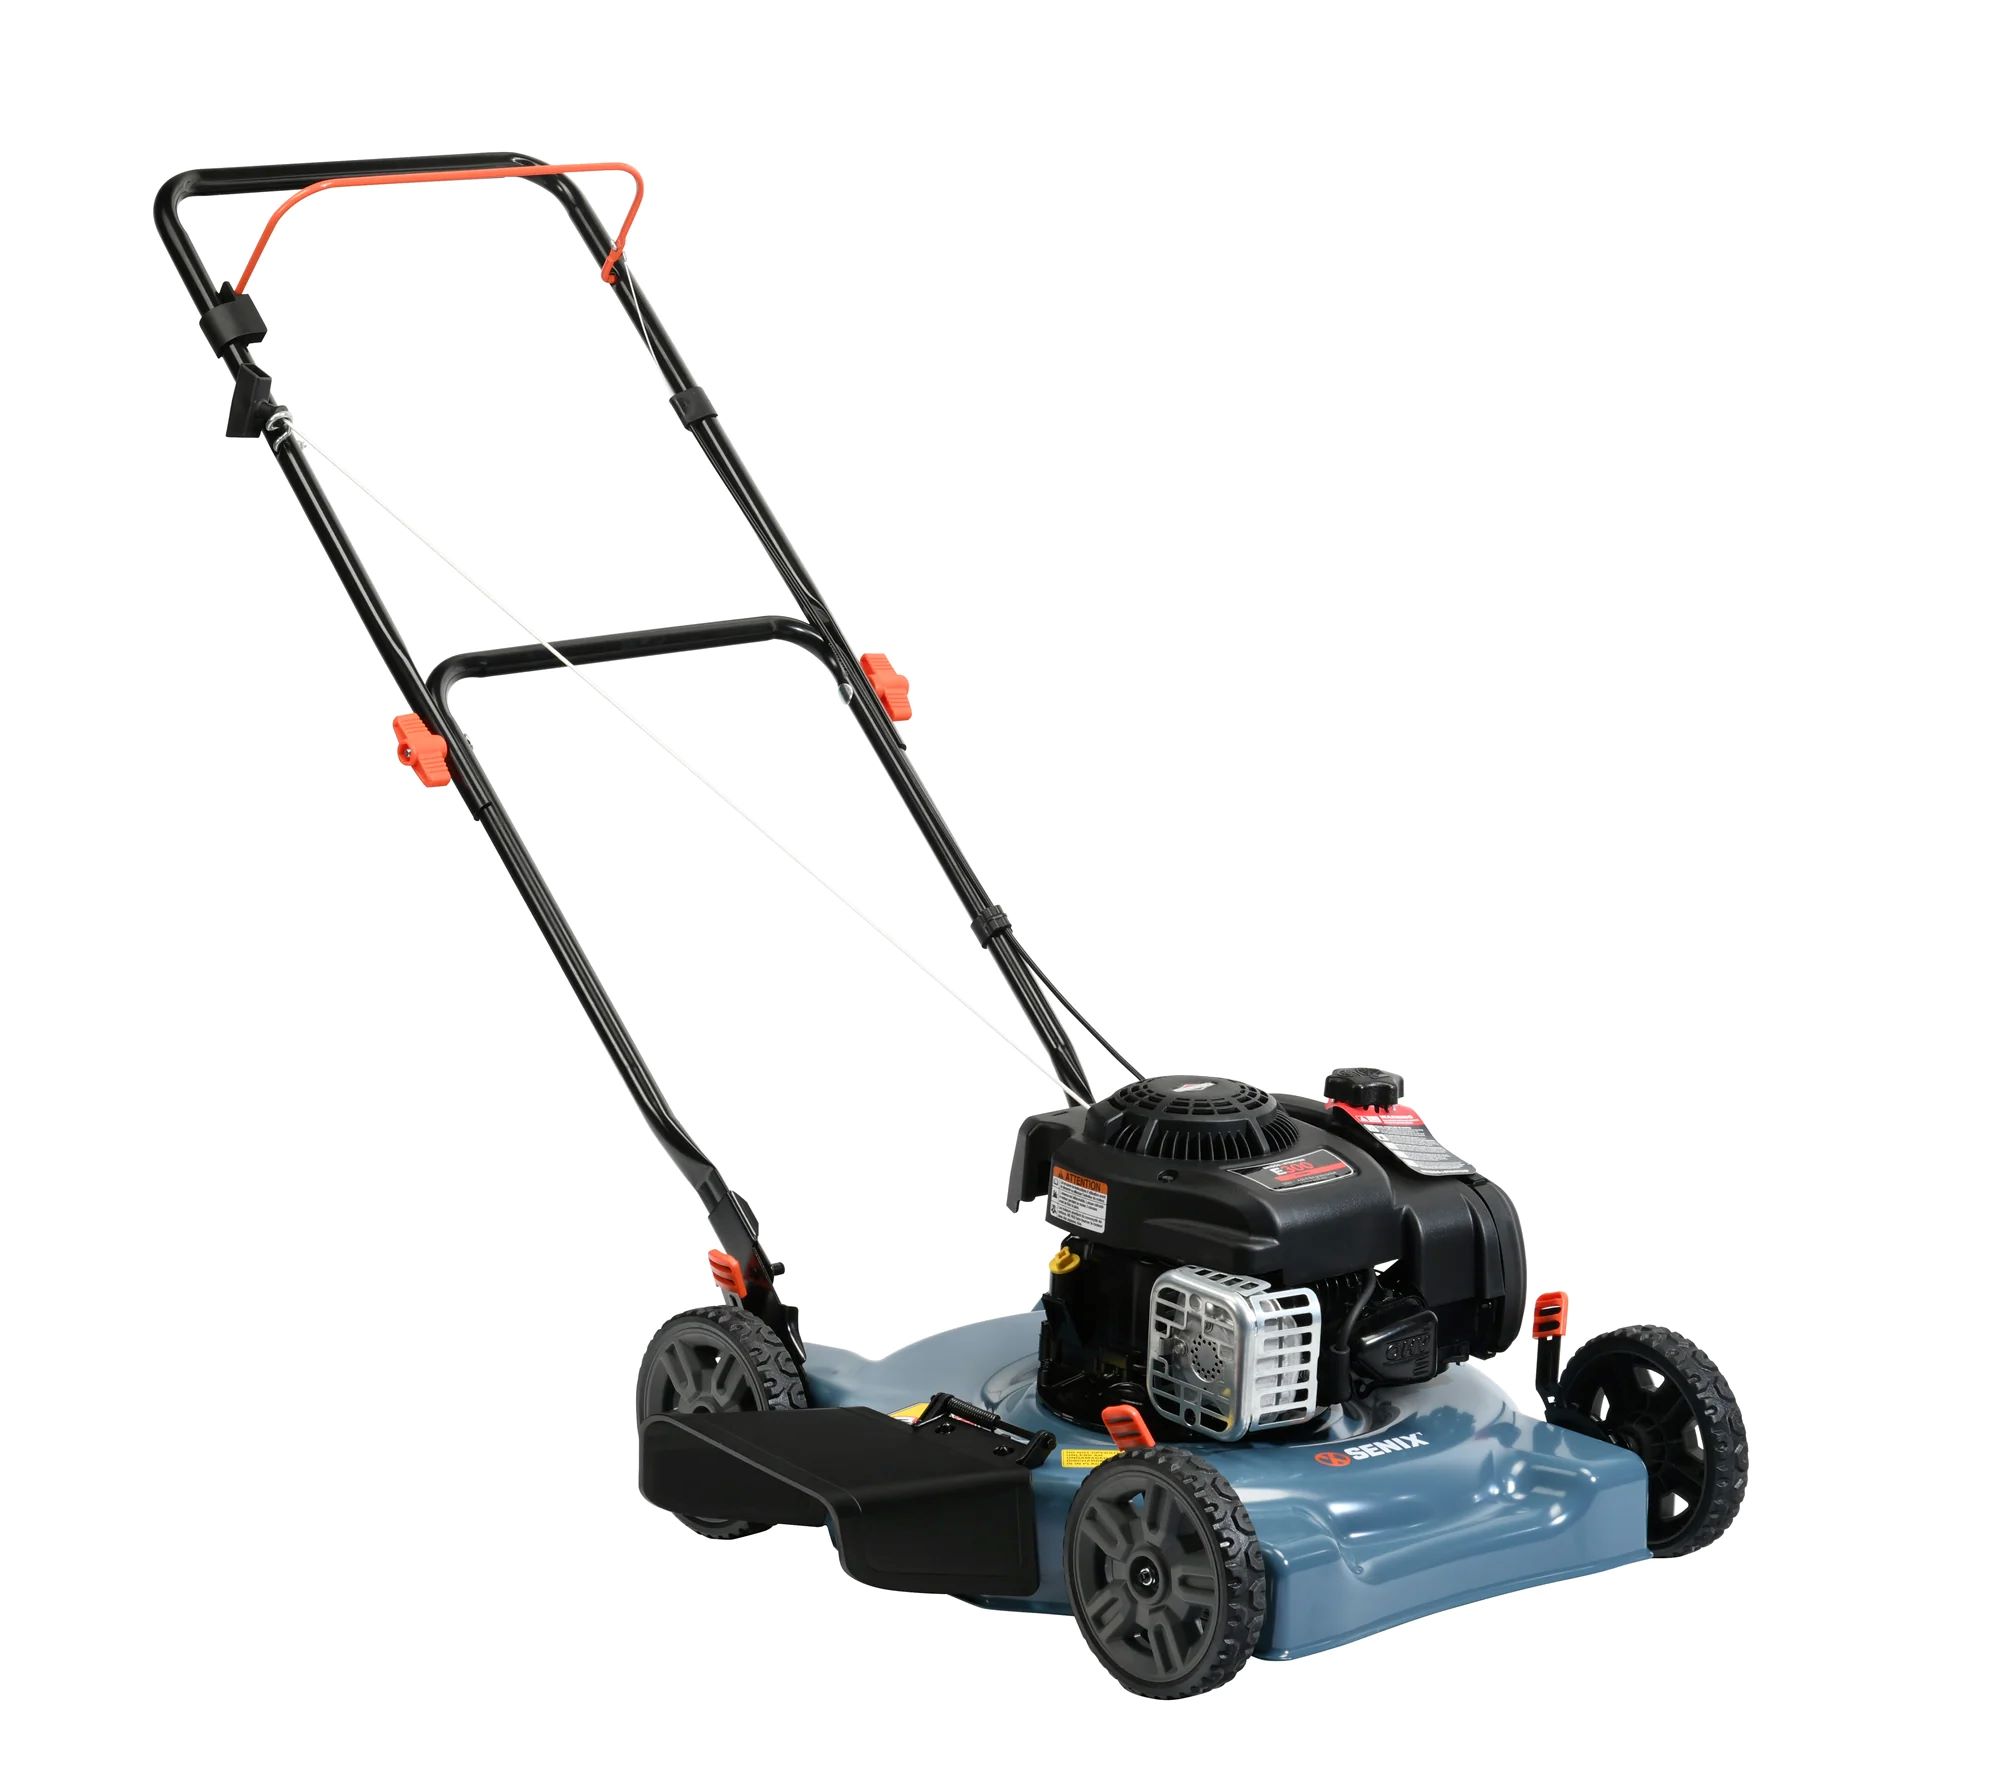 21-Inch 125cc Gas Powered 4-Cycle Push Lawn Mower, 2-In-1